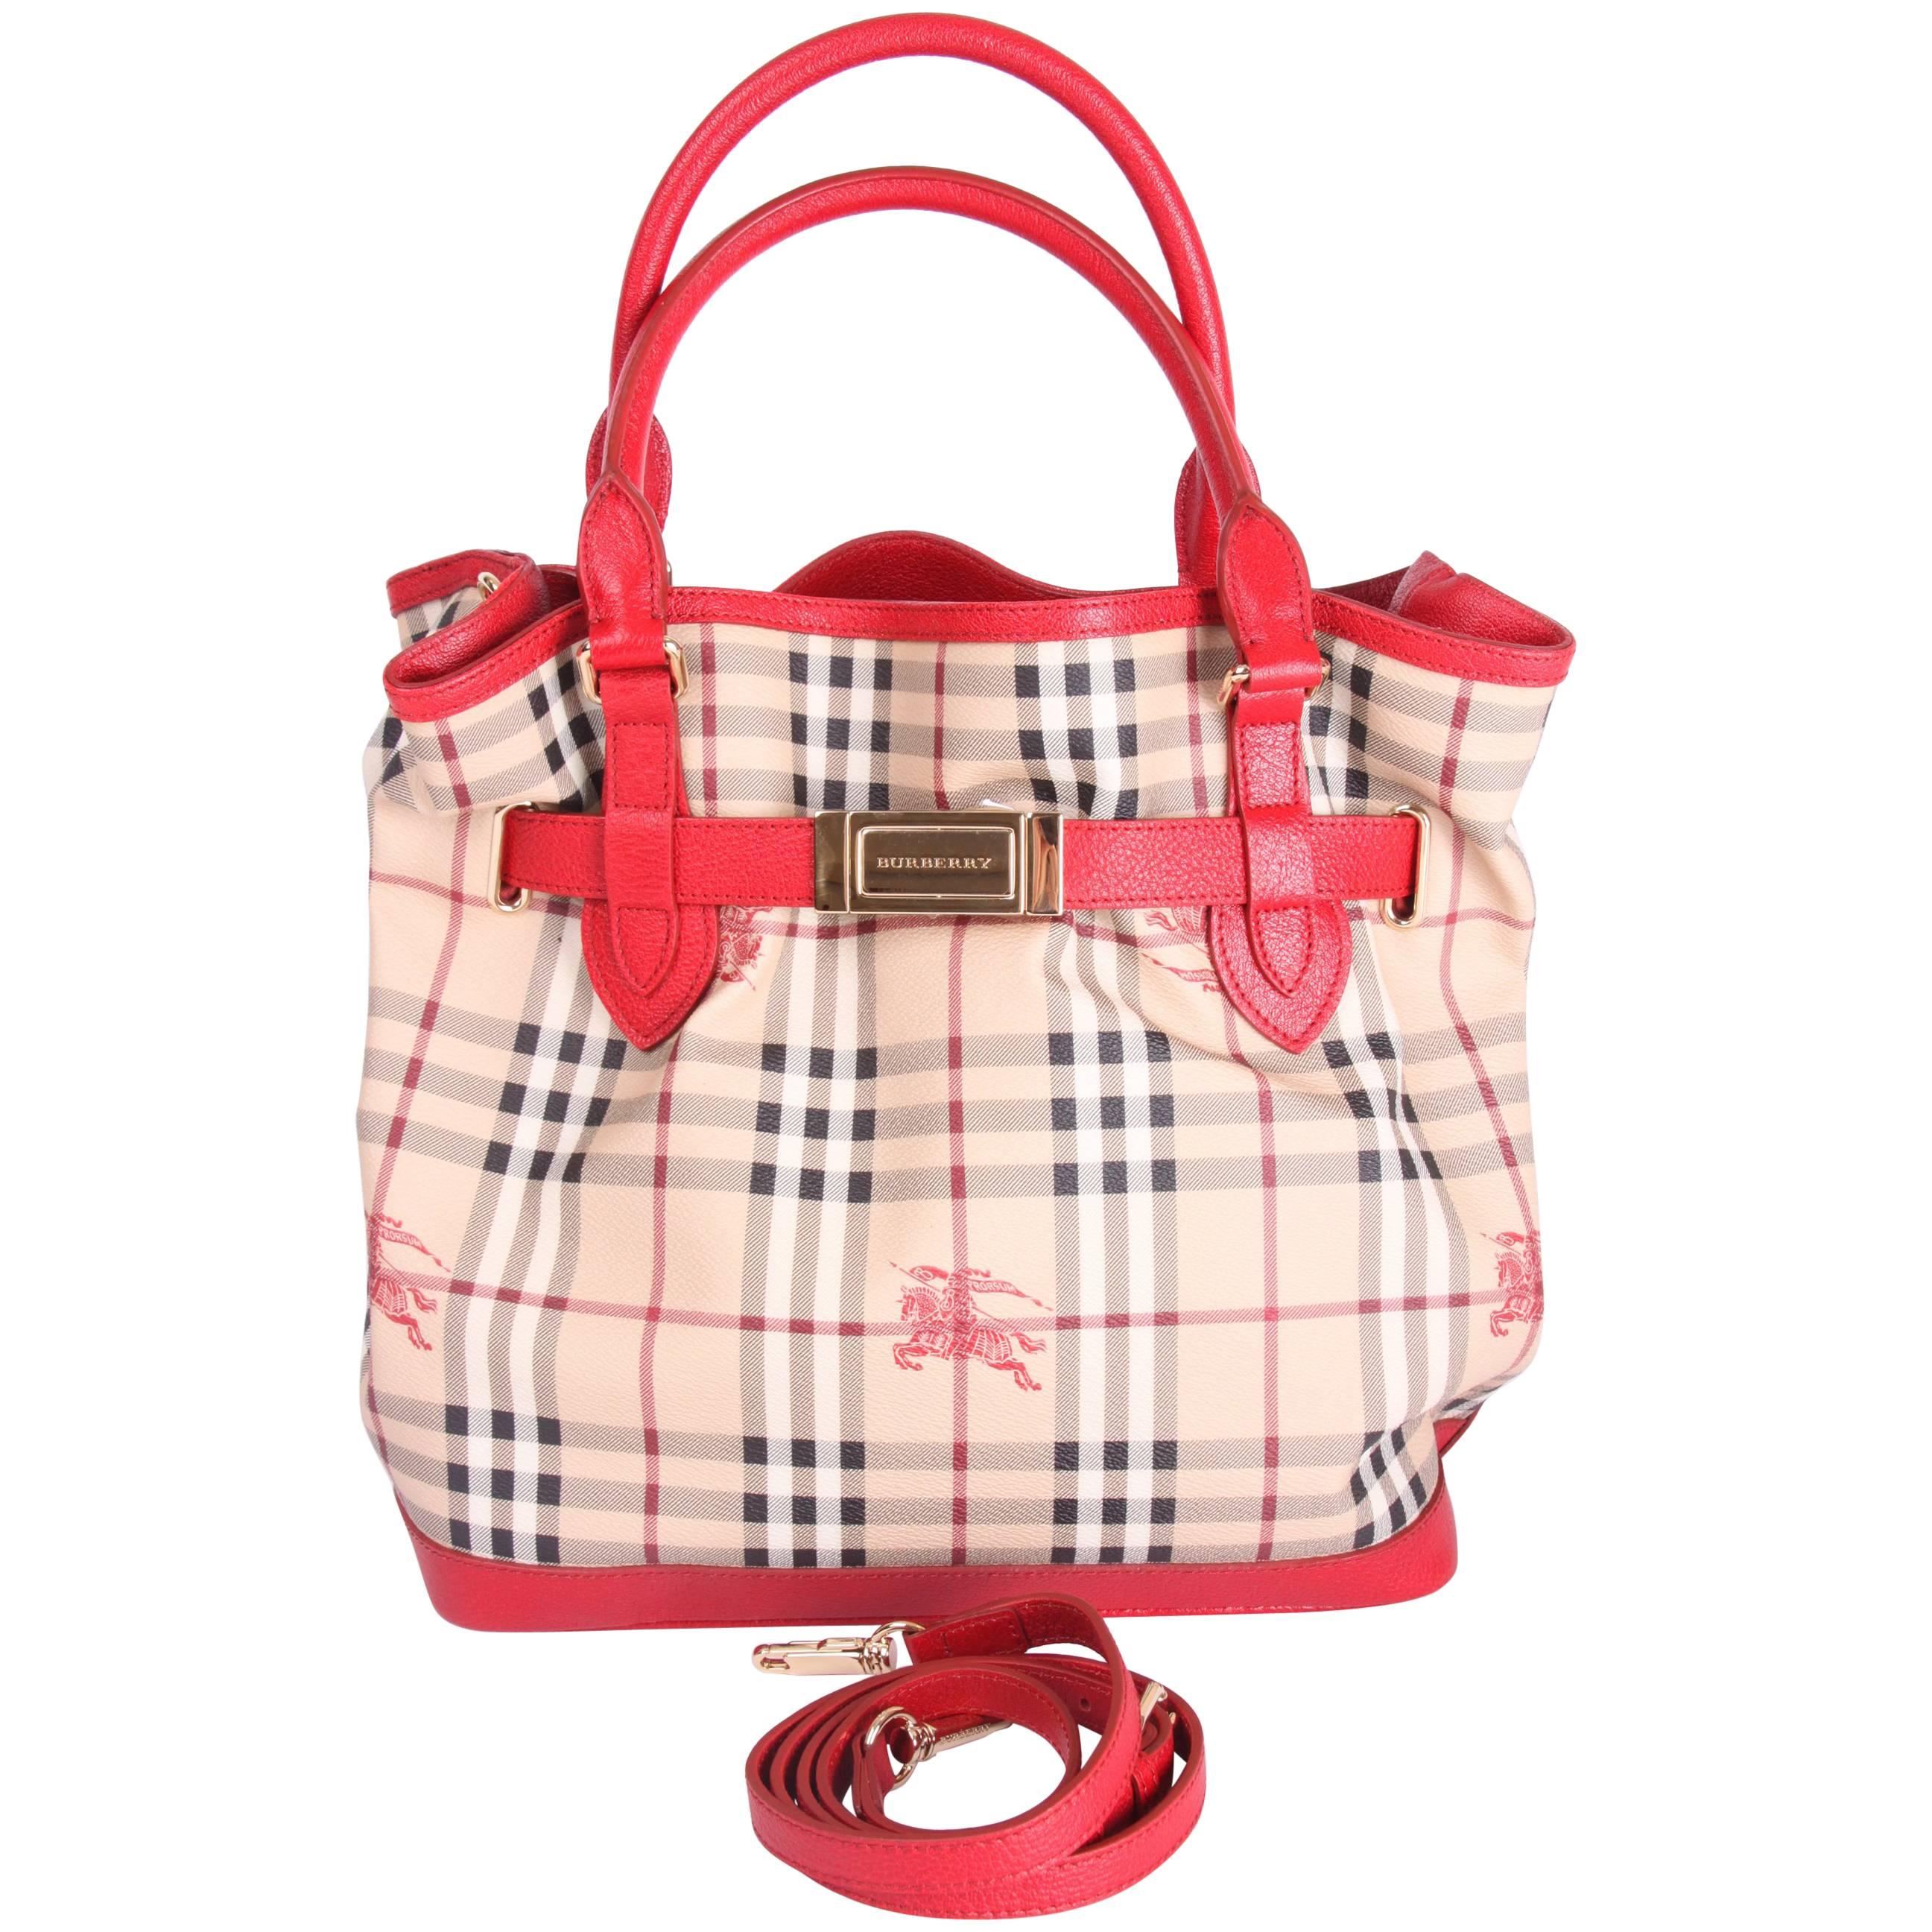 Burberry Checkered Top Handle Bag - red/beige/black/white